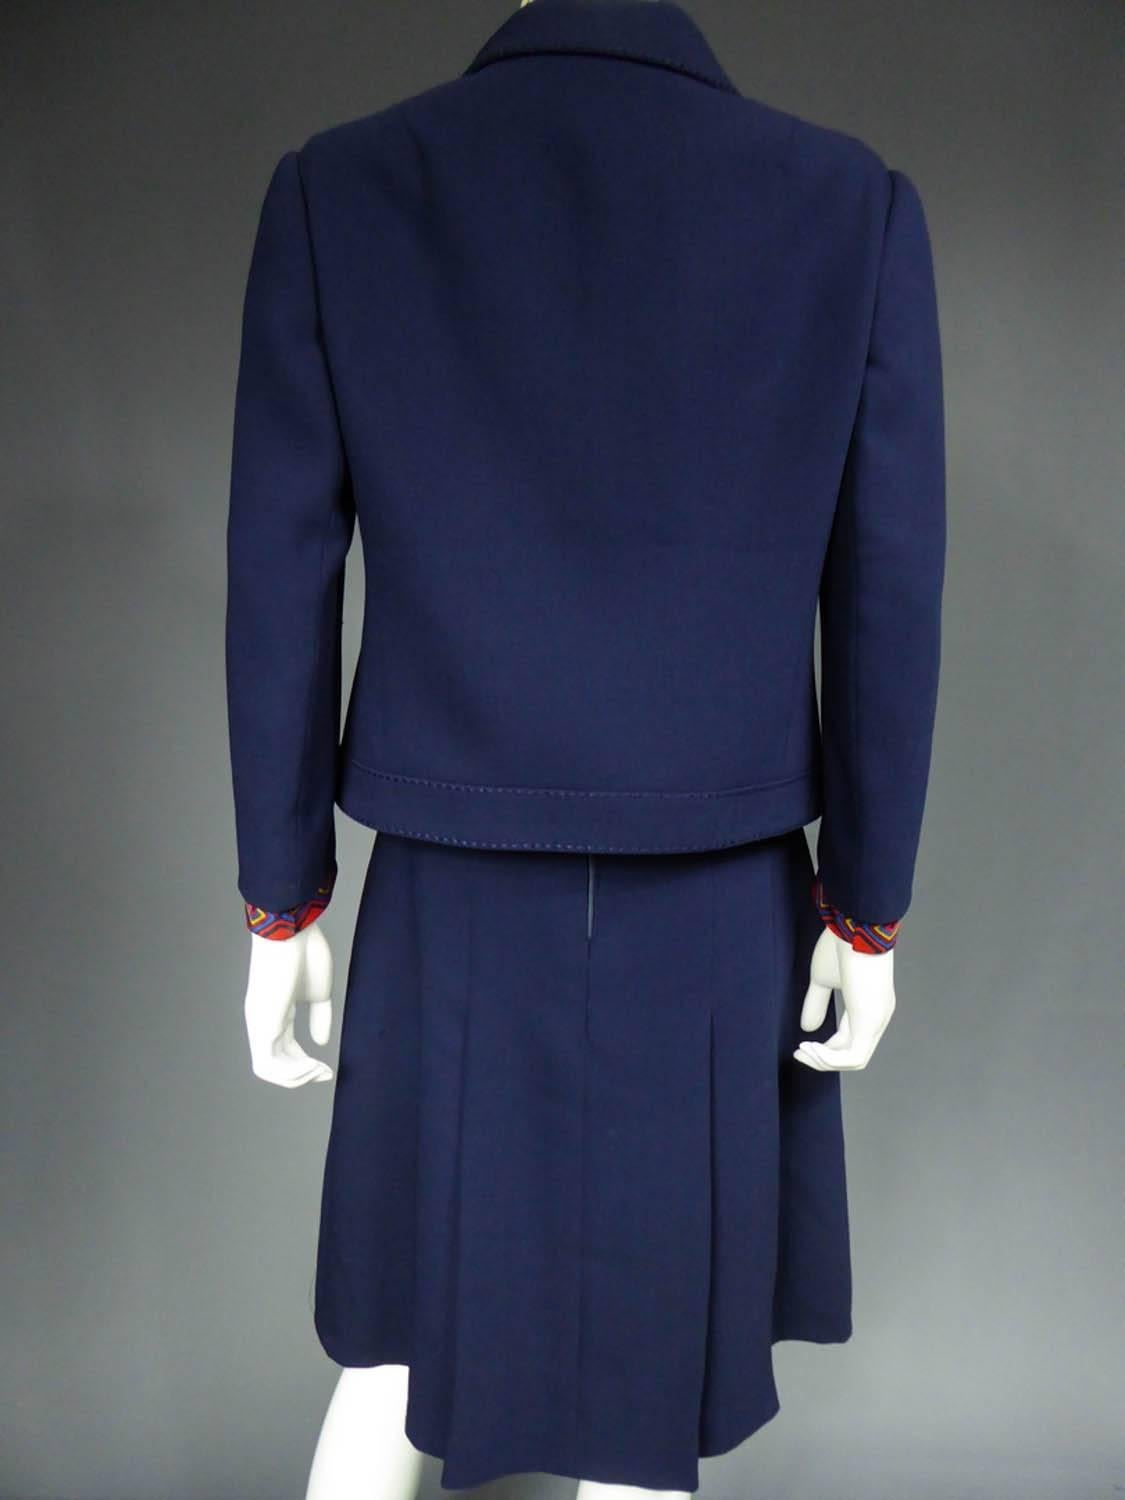 Women's A French Couture dress and jacket in Pierre Balmain style - Circa 1972 For Sale